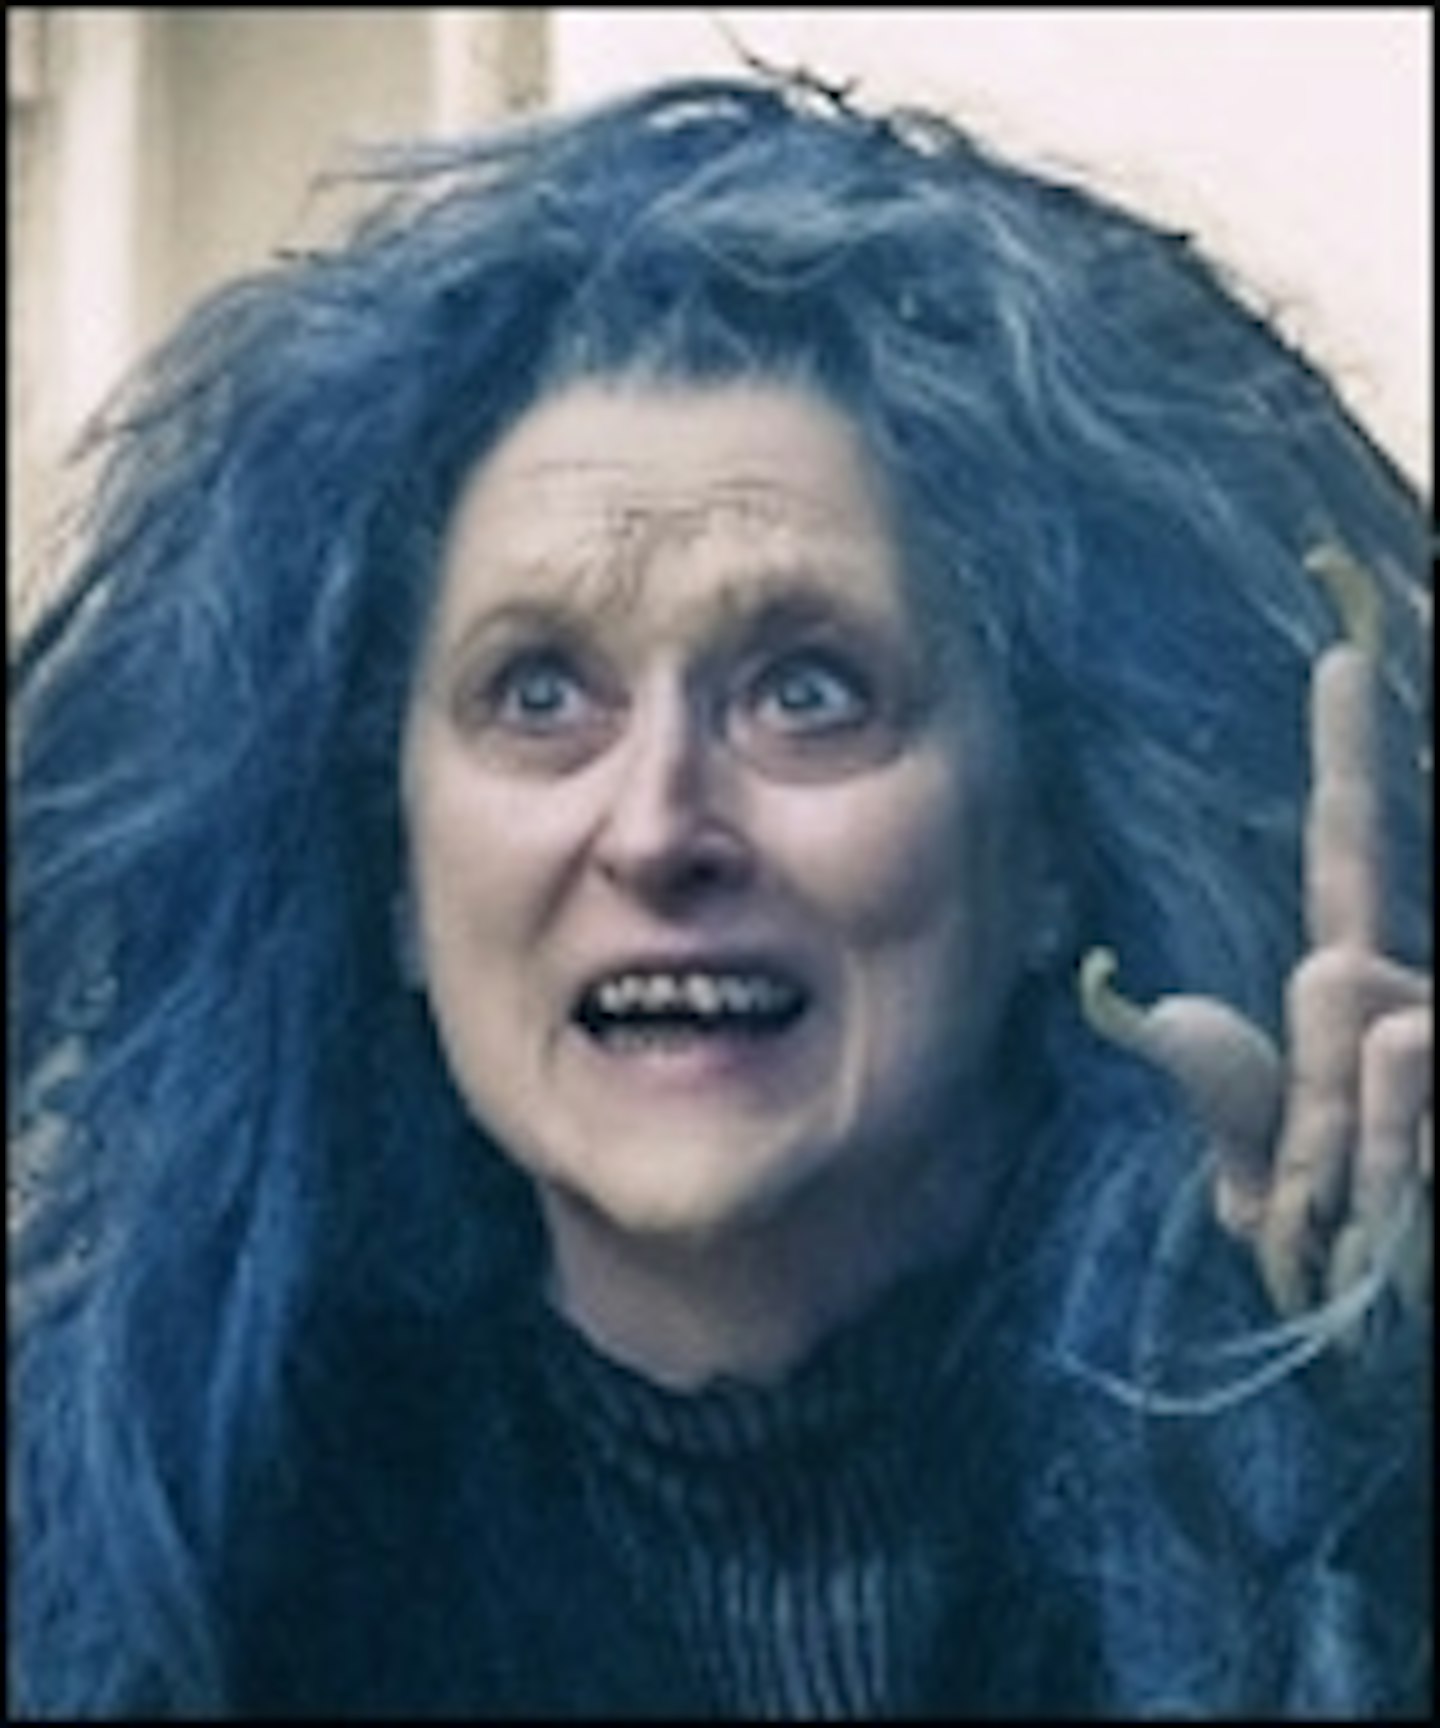 Fresh Look At Meryl Streep's Into The Woods Witch